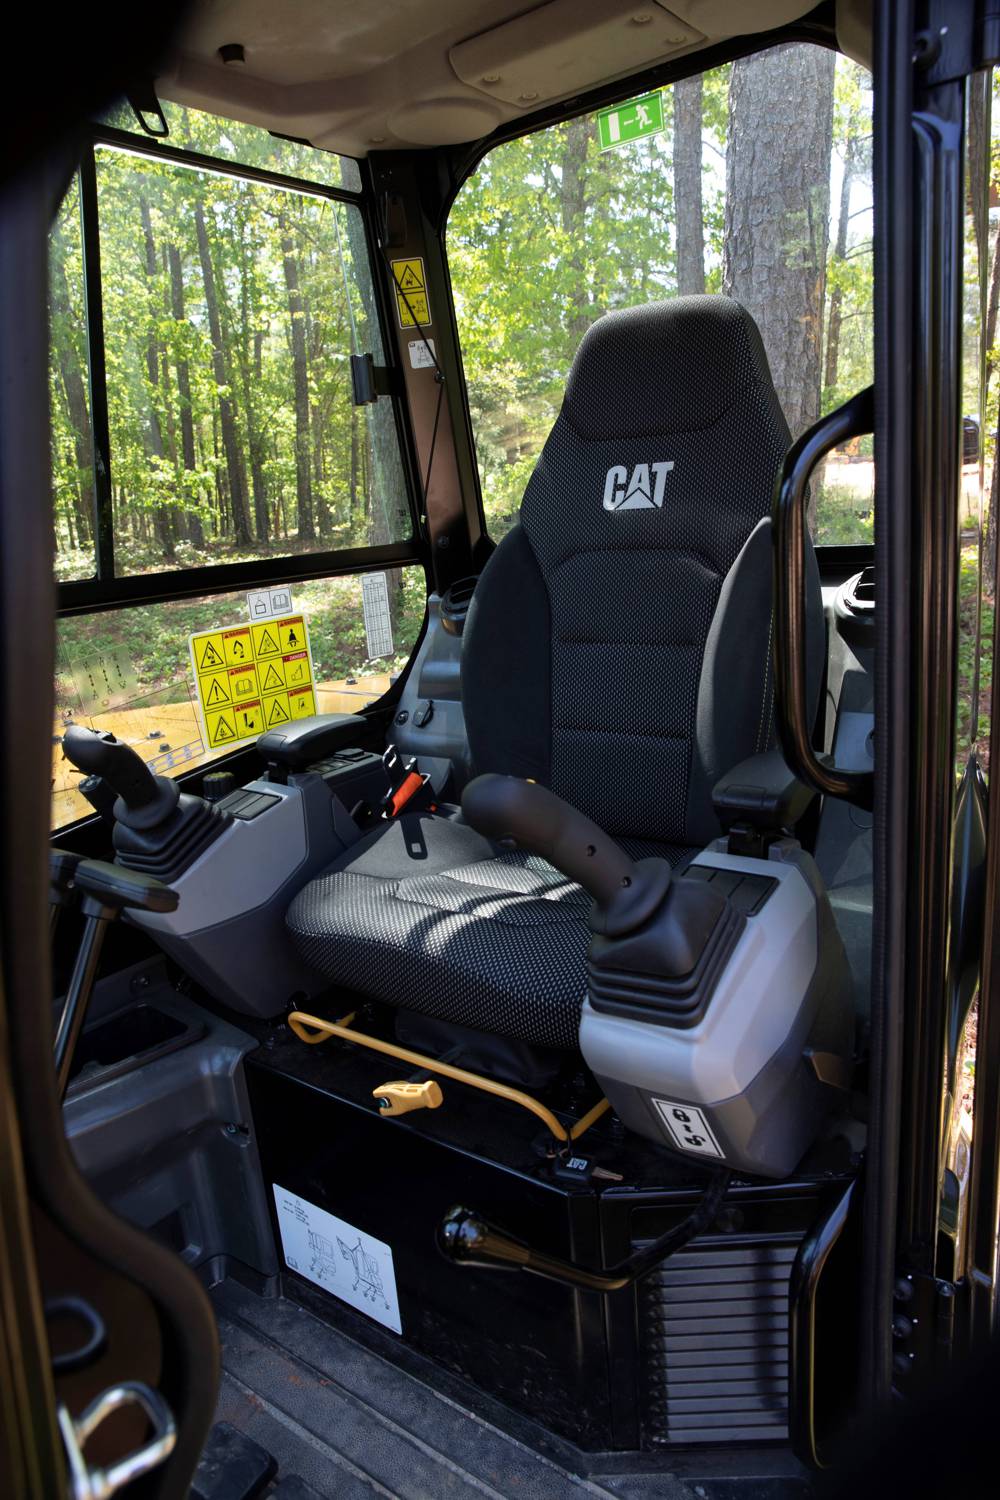 New Cat 304 and 305 CR Mini Hydraulic Excavators deliver on power and performance